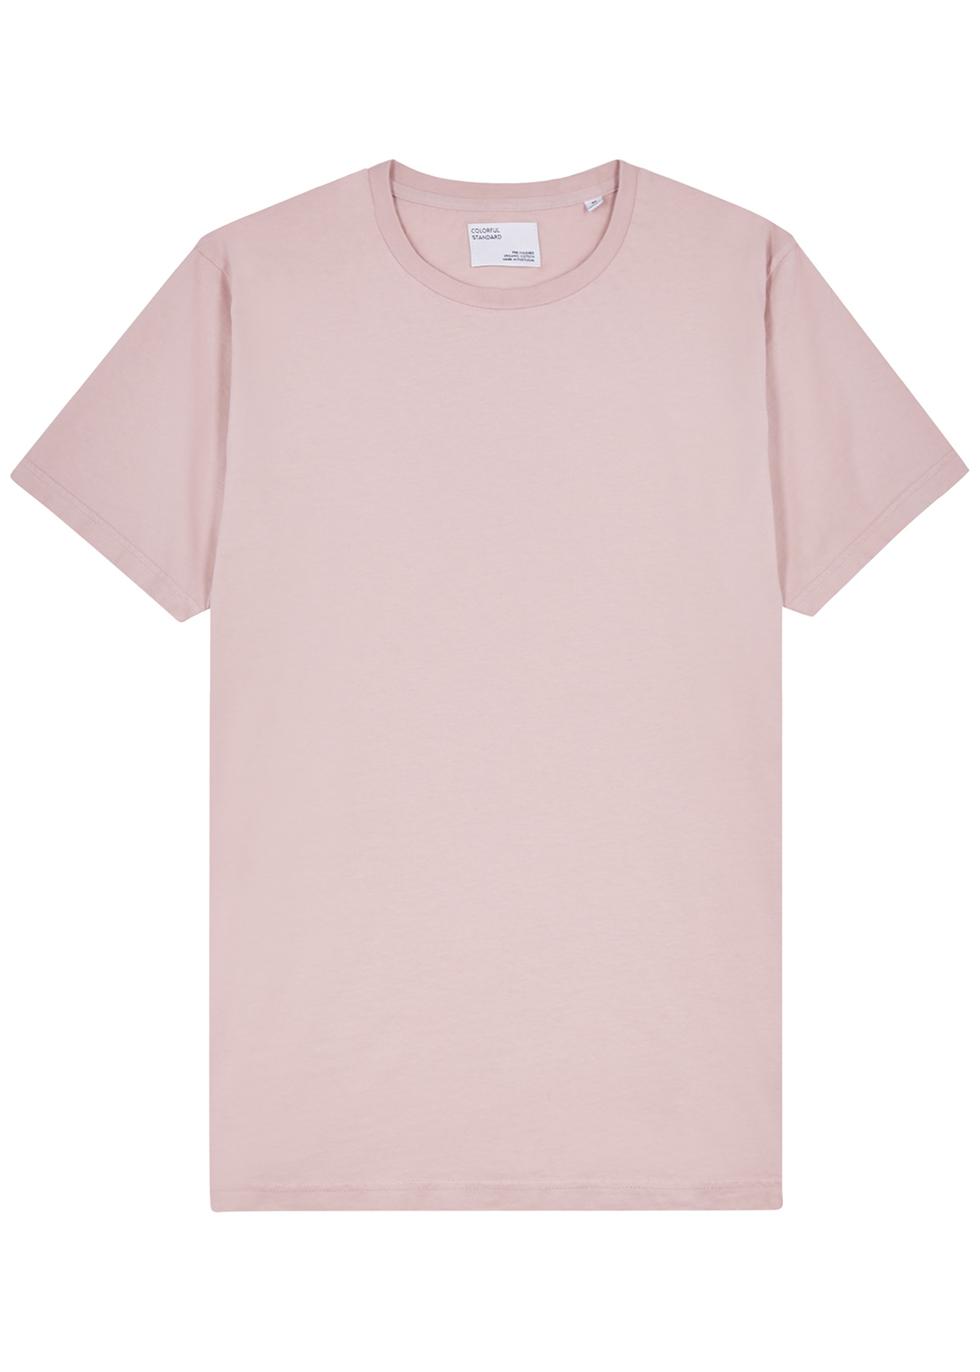 Light pink cotton T-shirt by COLORFUL STANDARD